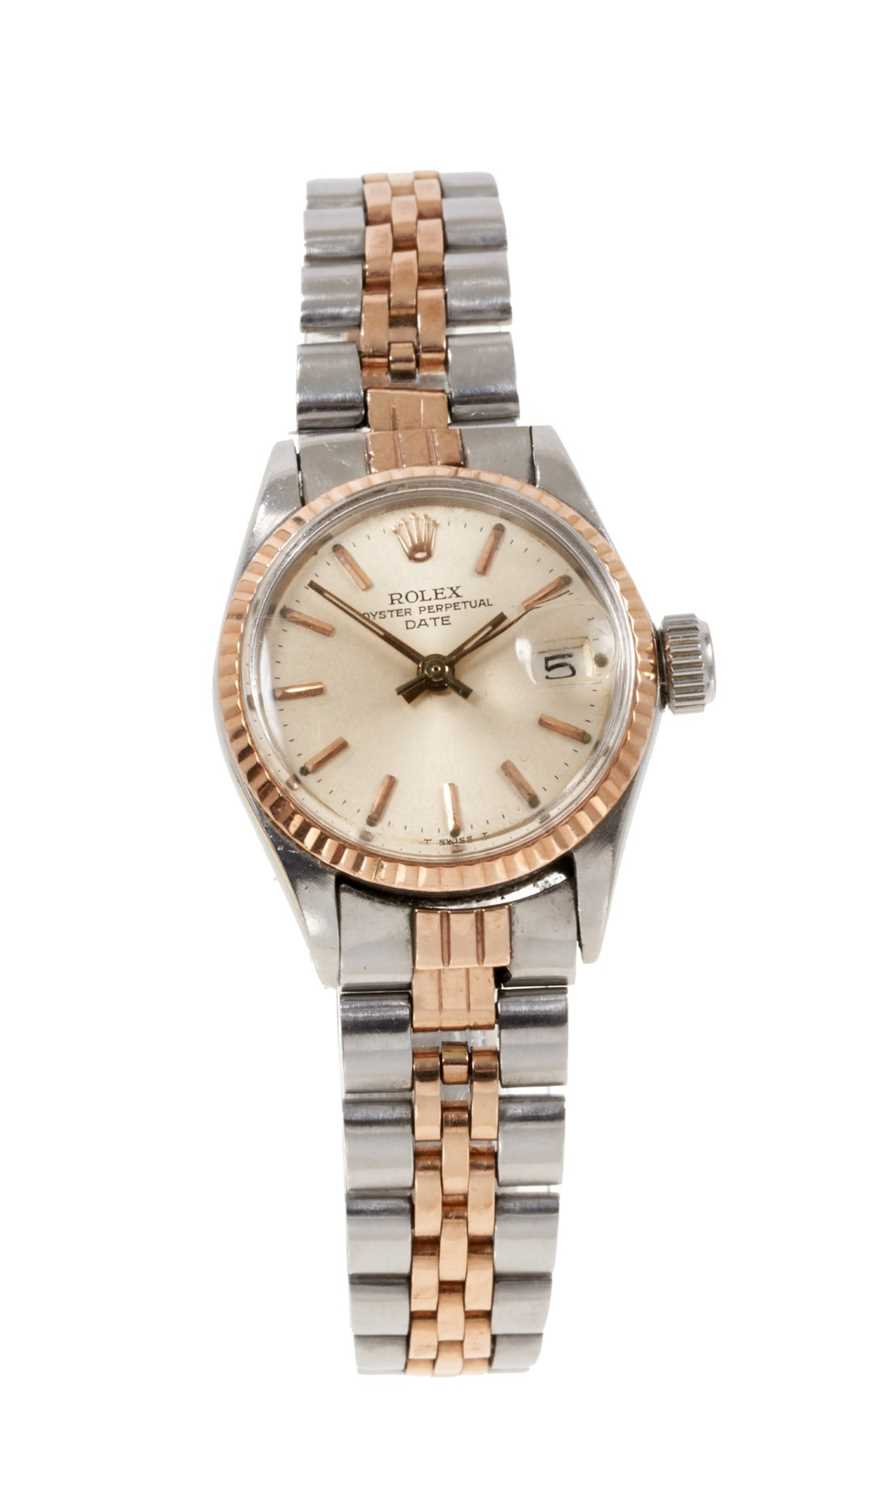 Lot 583 - Lady's Rolex Oyster Perpetual Date gold and stainless steel wristwatch